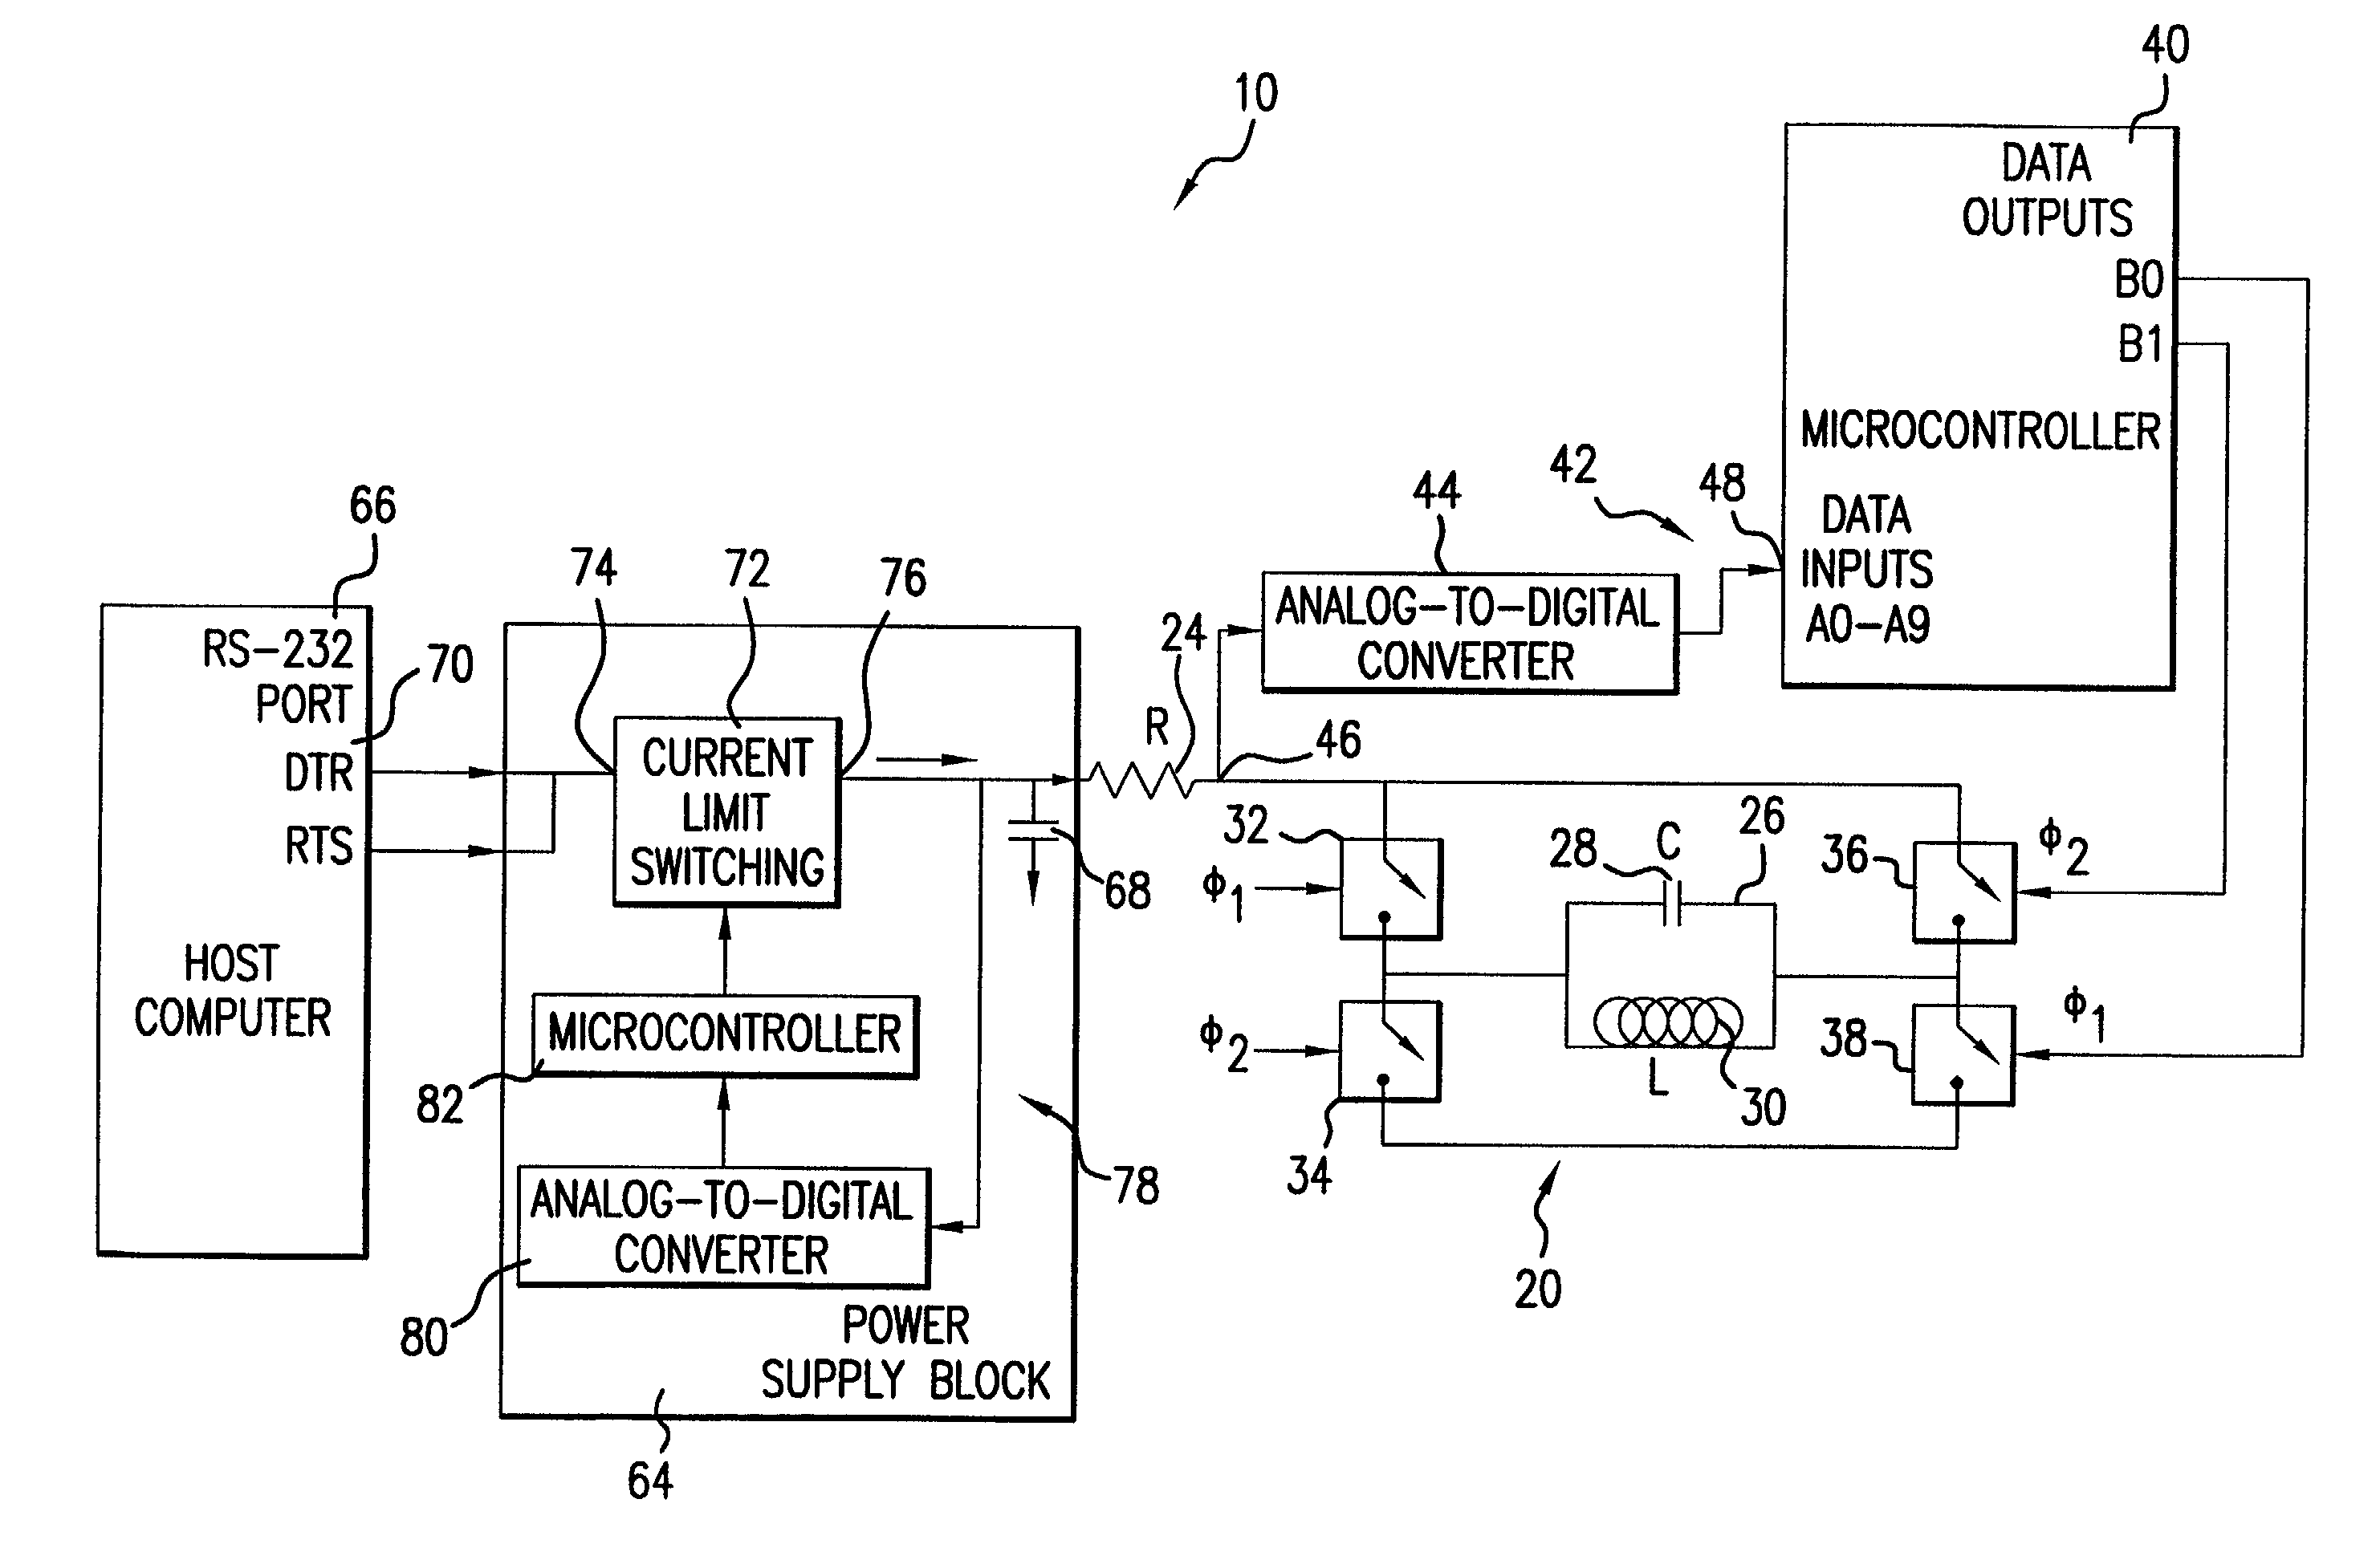 Transmitter system for wireless communication with implanted devices